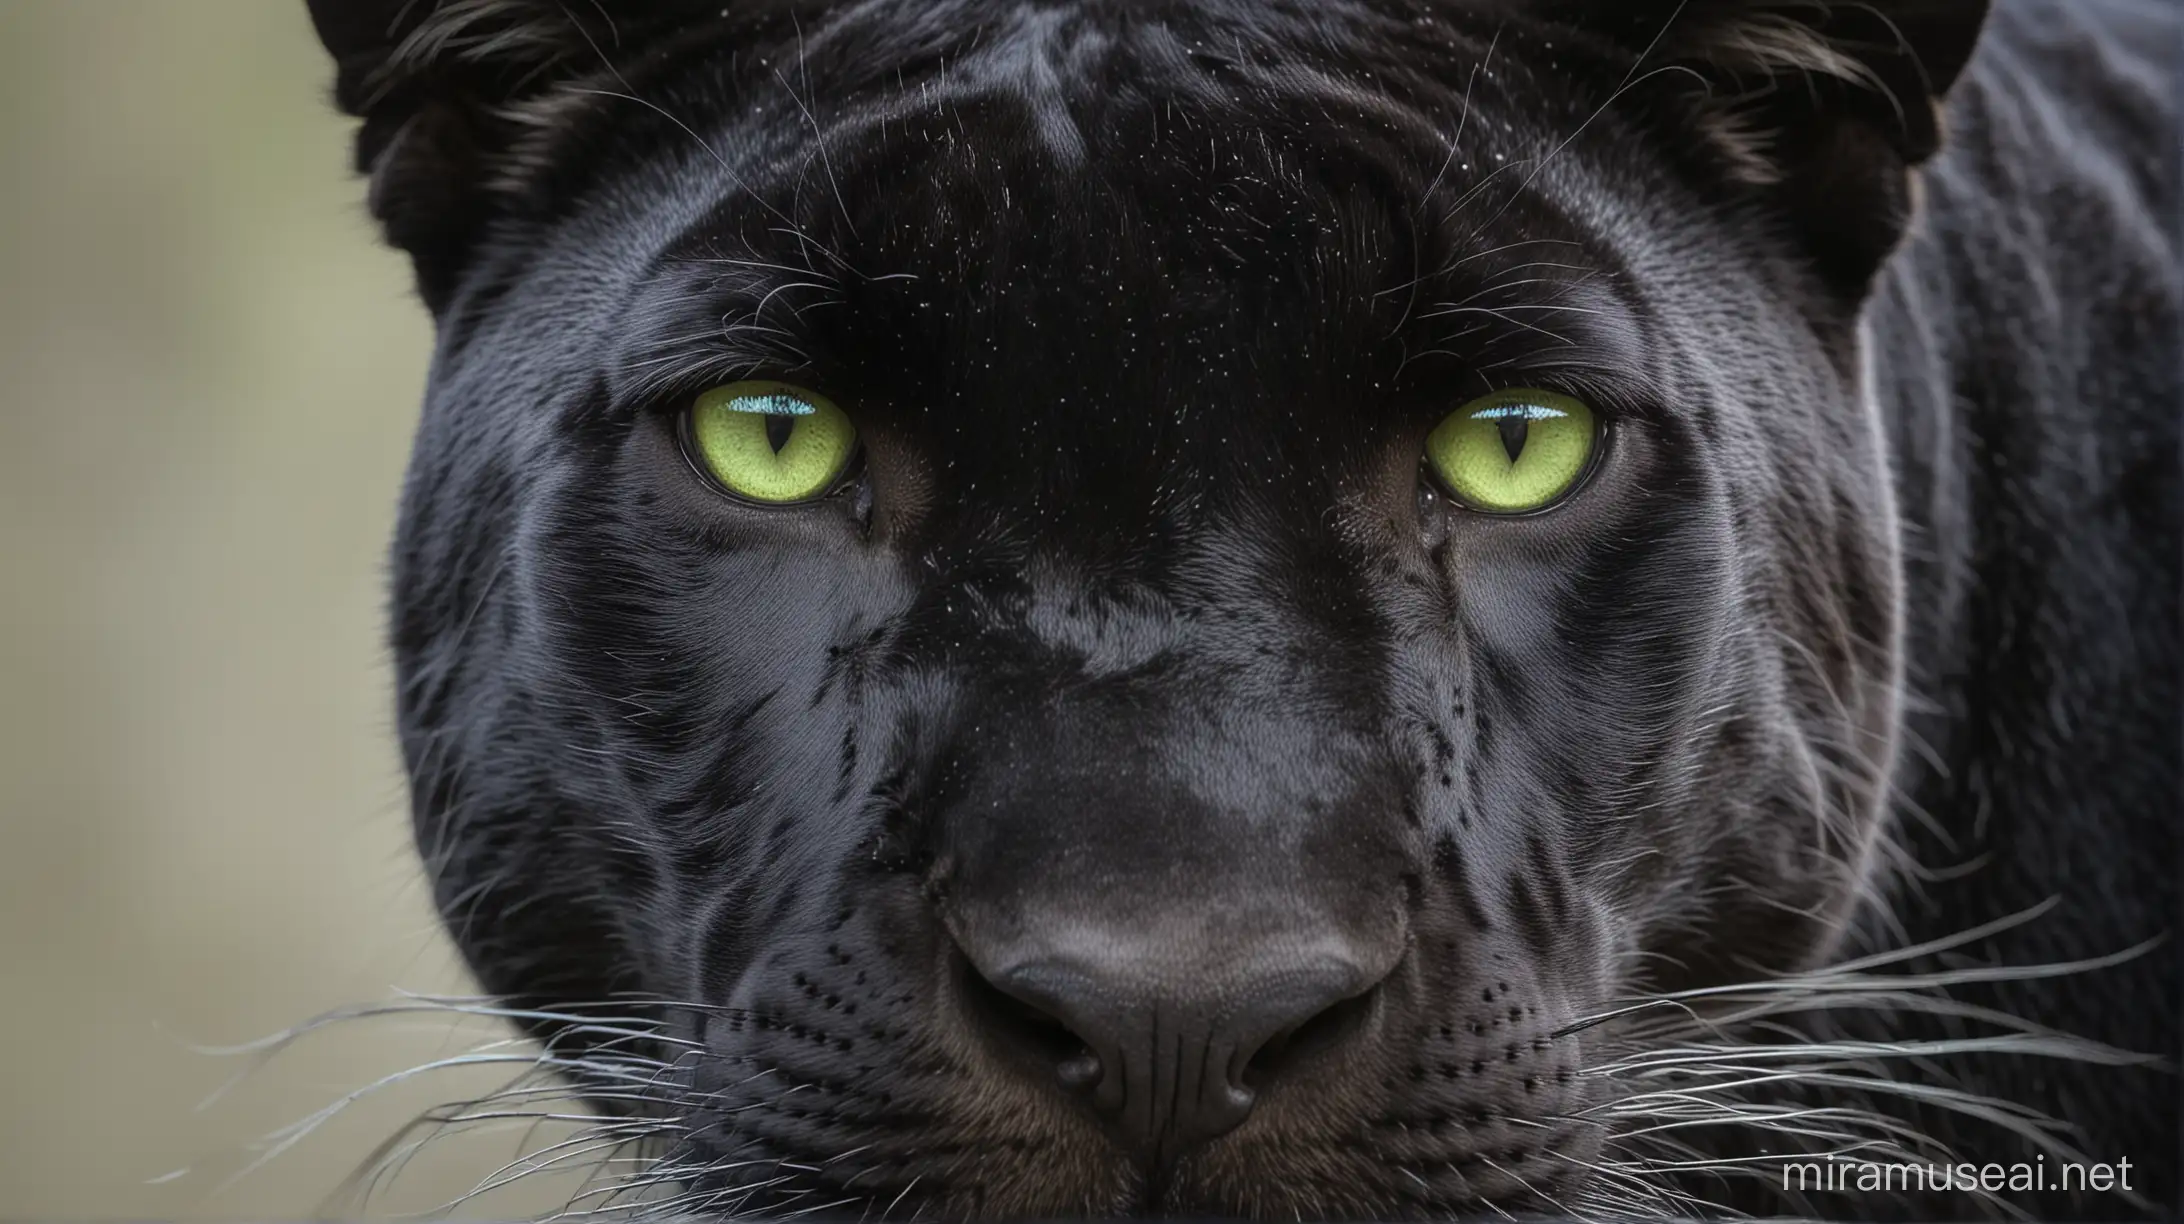 Intense Panther Portrait with Piercing Green Eyes